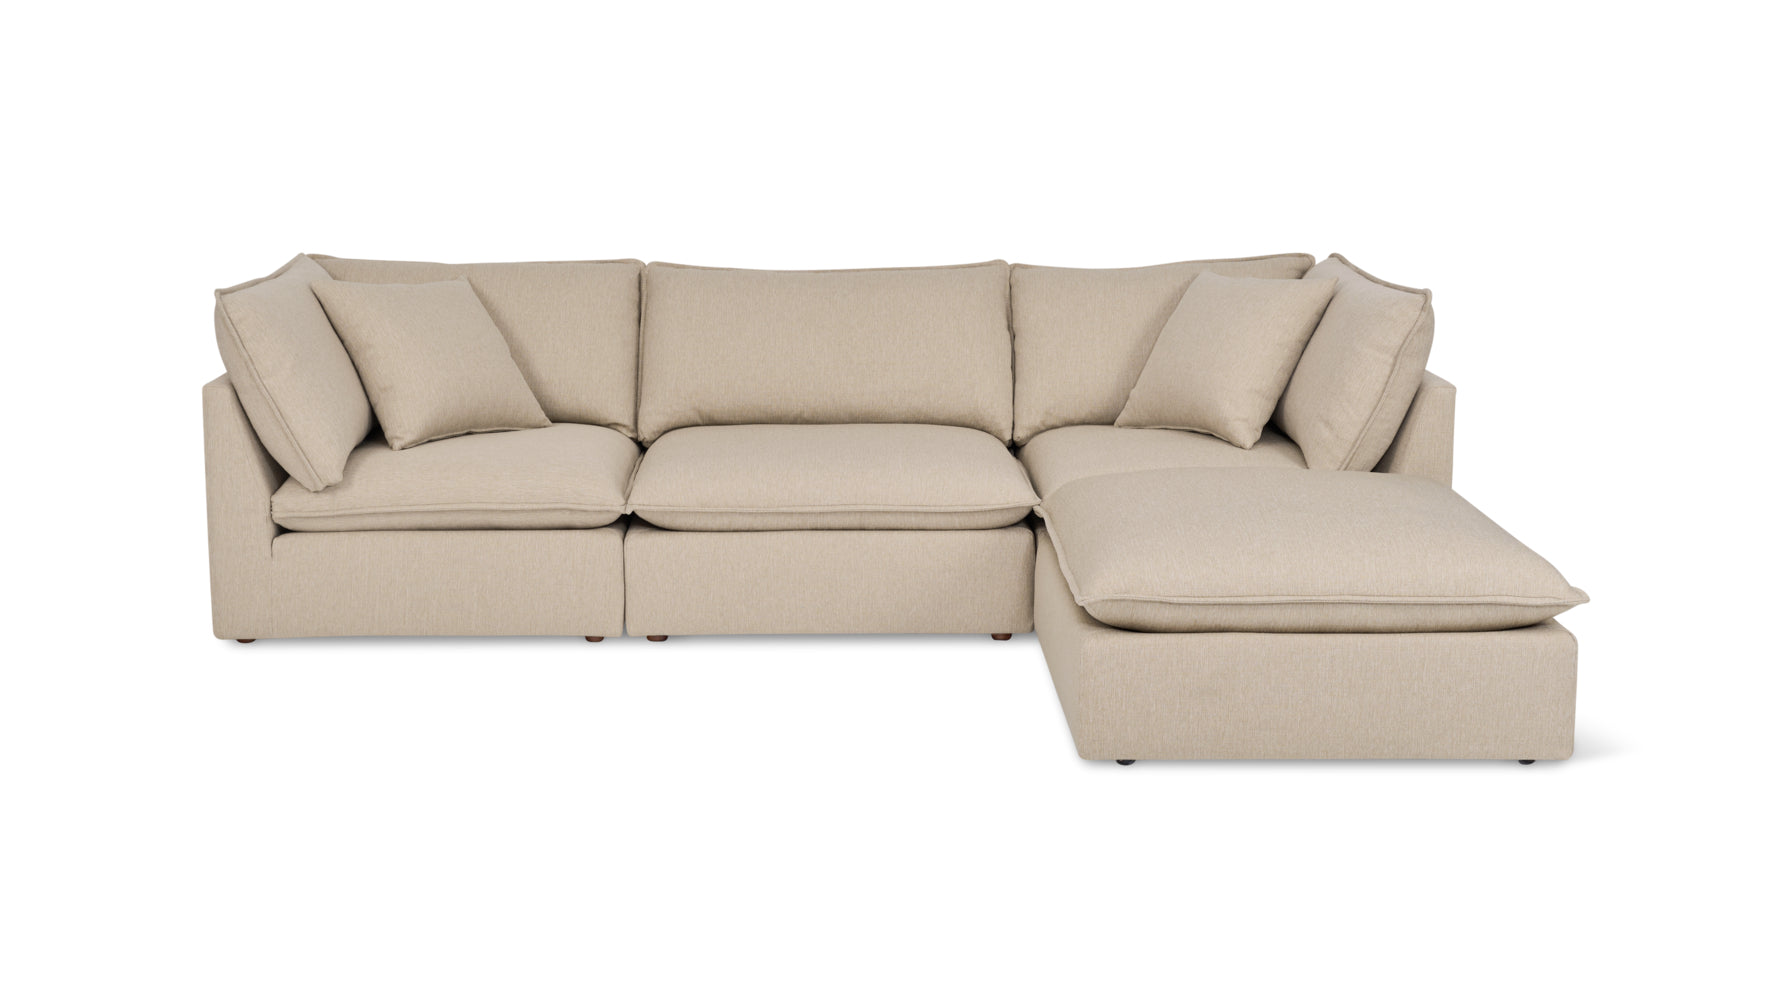 Chill Time 4-Piece Modular Sectional, Biscuit - Image 1